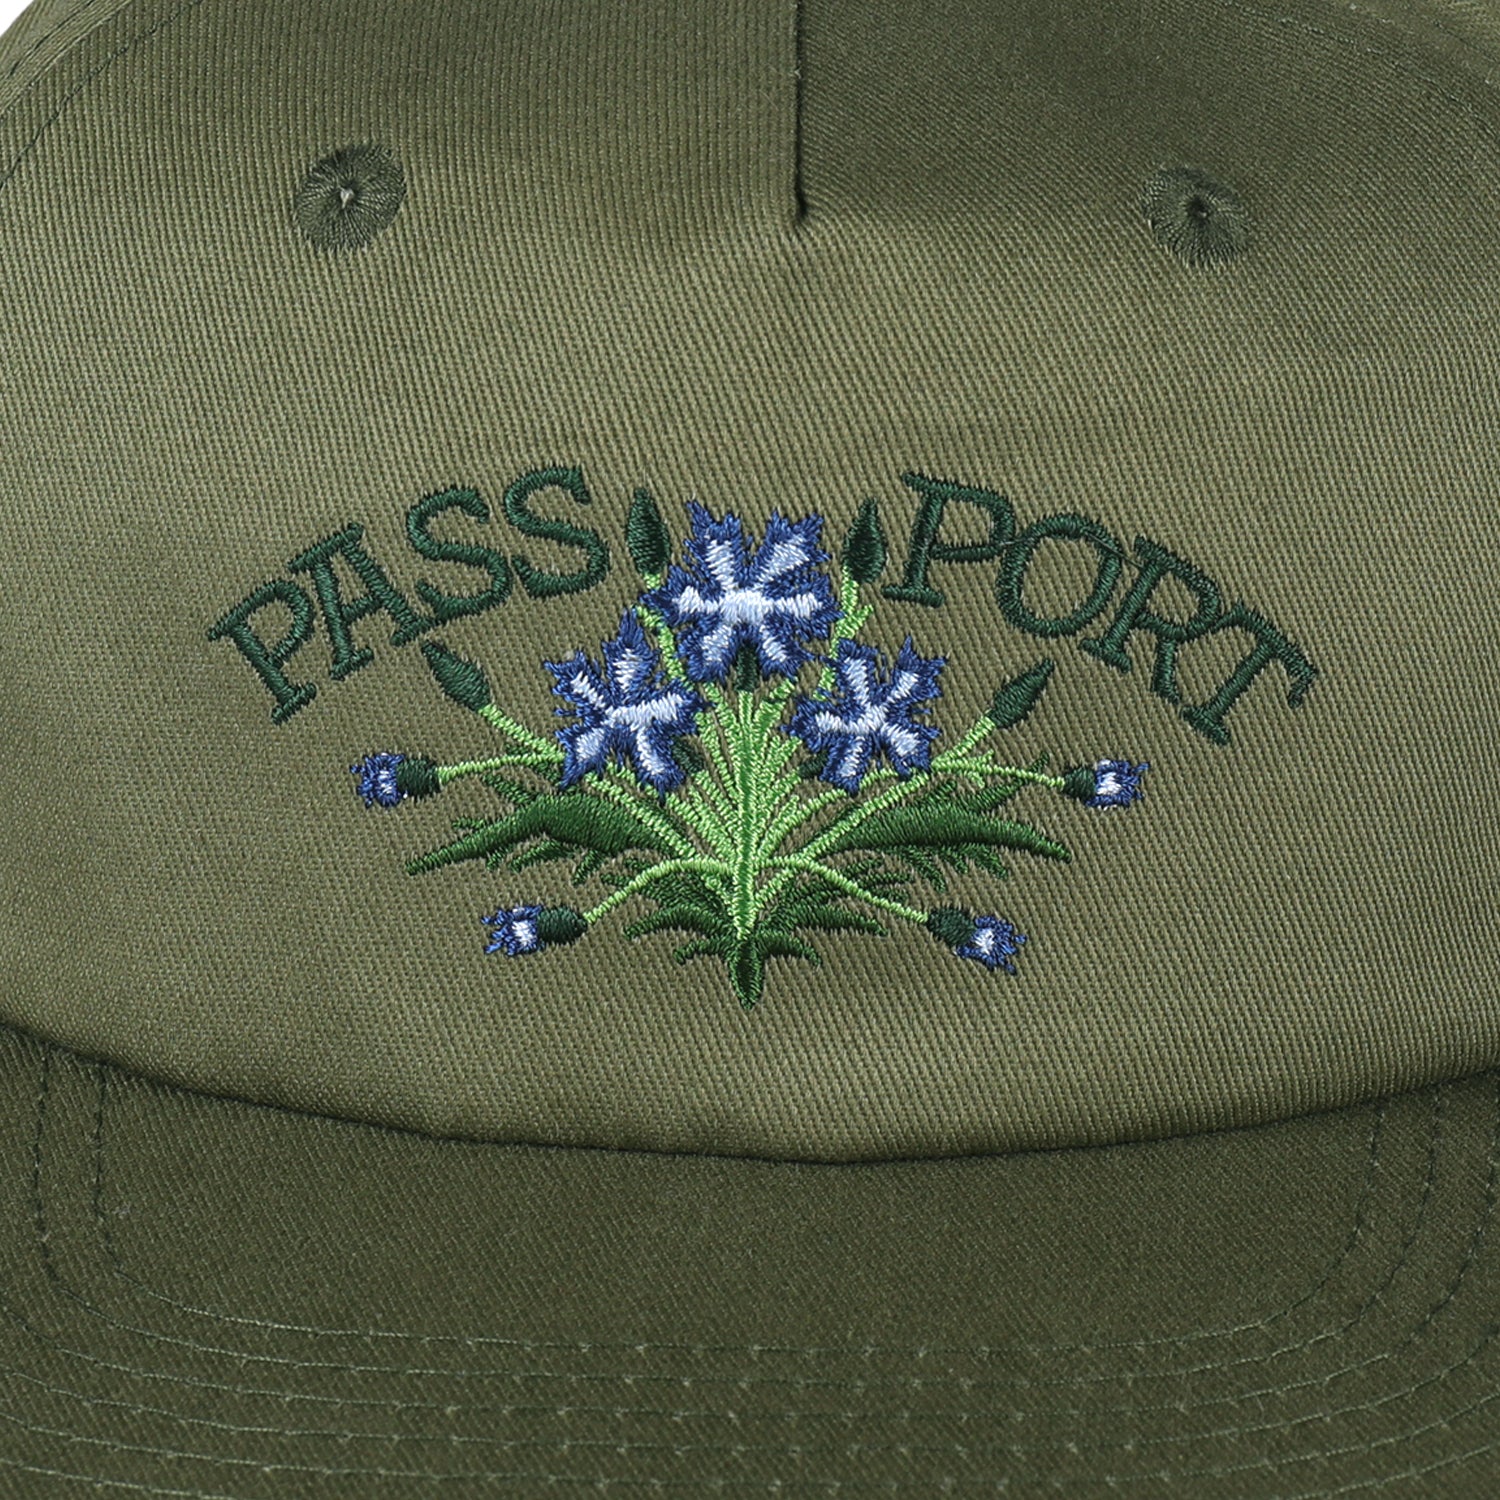 Pass~Port Bloom Workers Cap - Military Green